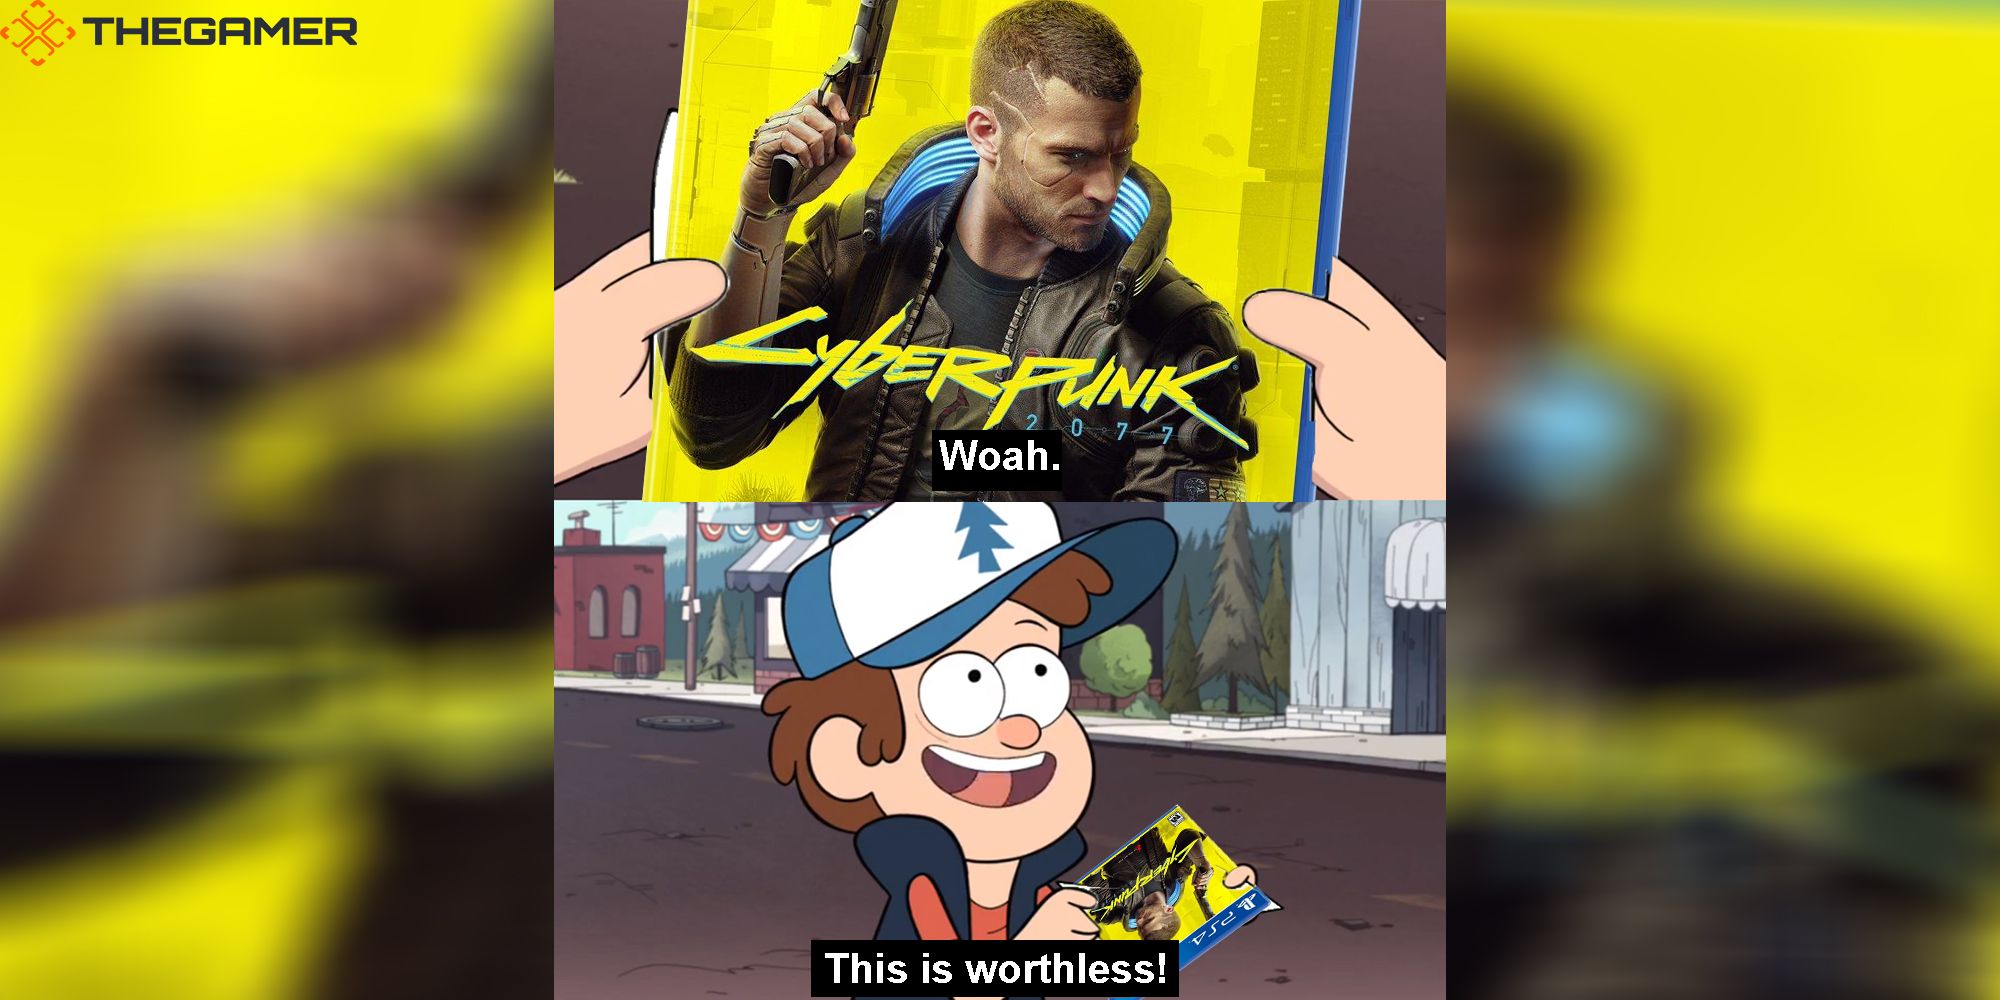 A young kid holds a PS4 port of Cyberpunk 2077 and exclaims that it is worthless.